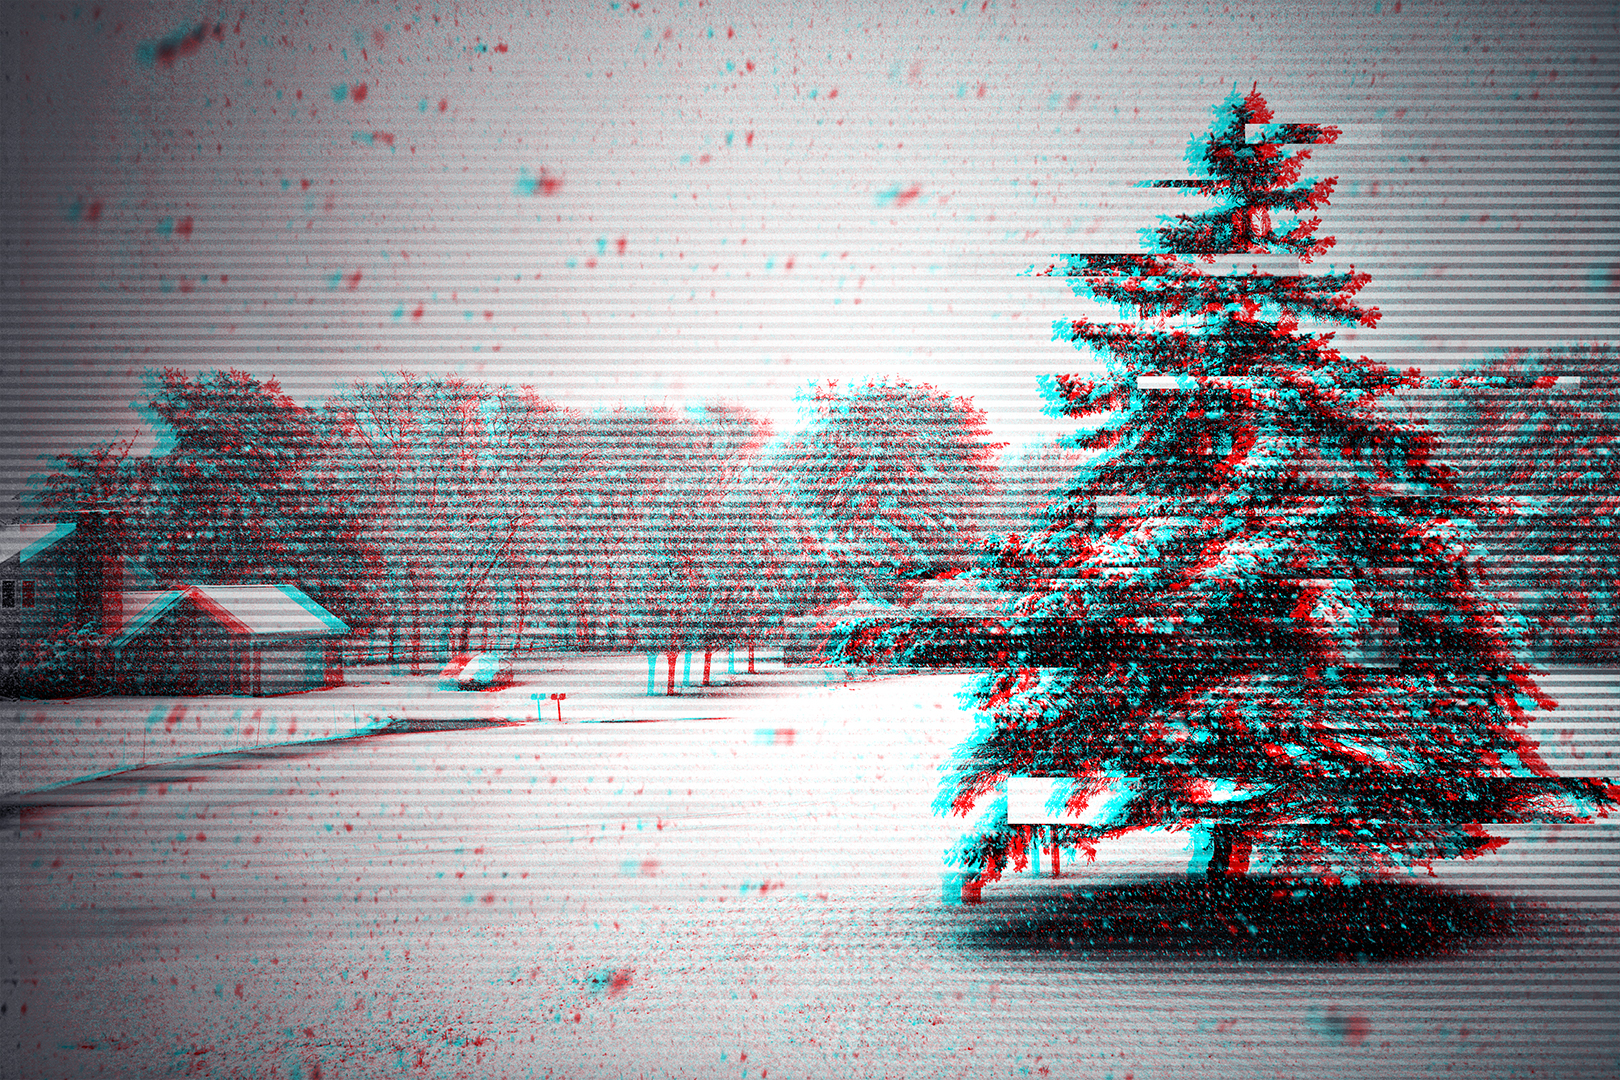 General 1620x1080 trees tree bark tree trunk snow snowflakes winter monochrome low saturation photography landscape edit photoshopped glitch art USA cold